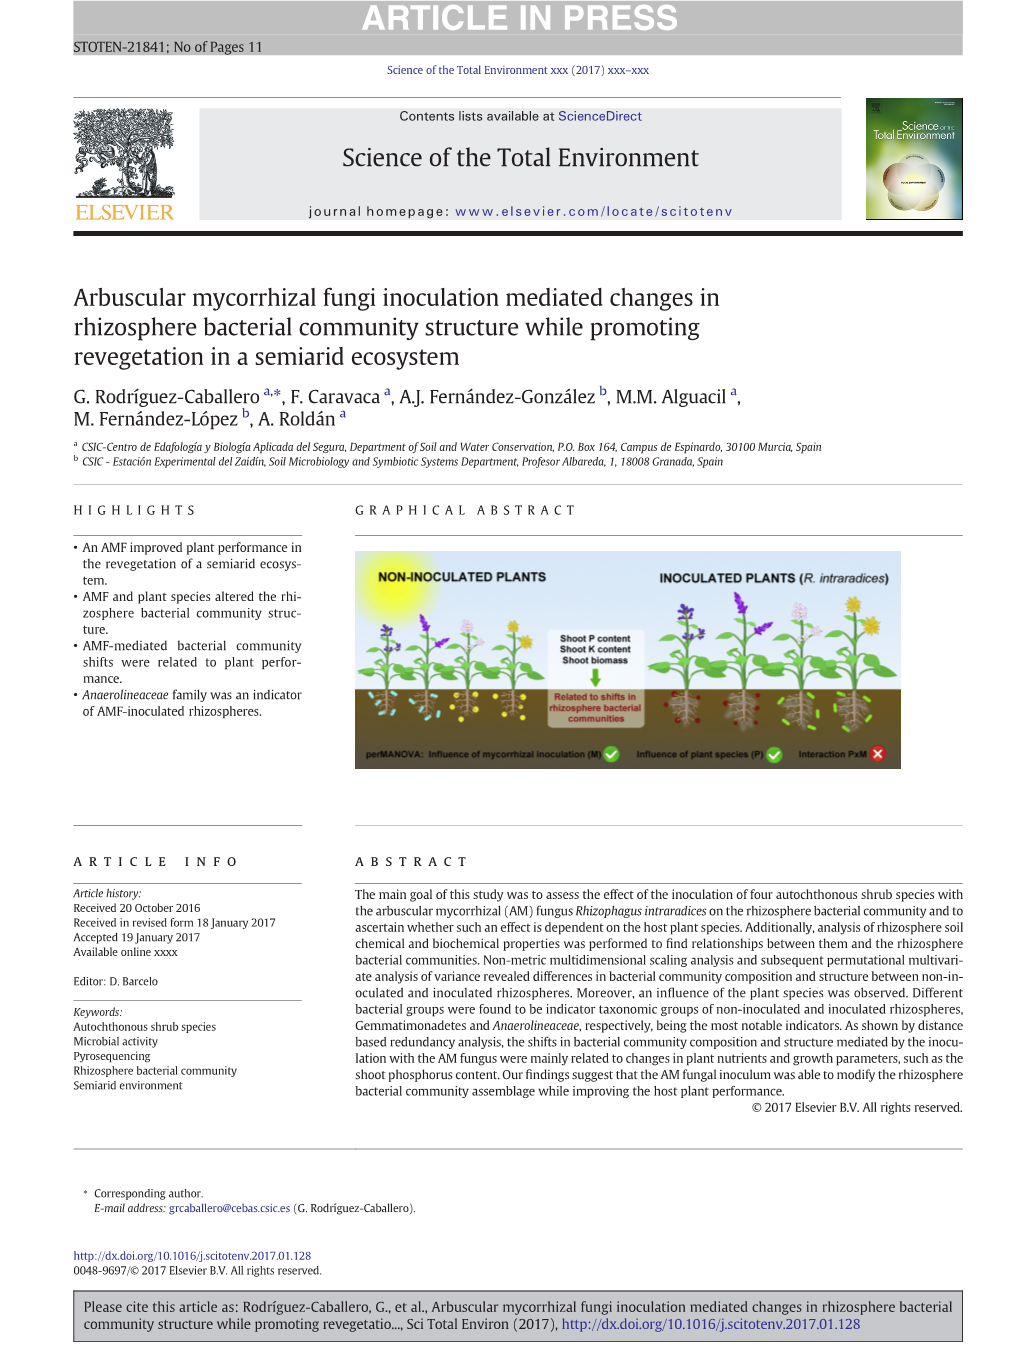 Arbuscular Mycorrhizal Fungi Inoculation Mediated Changes in Rhizosphere Bacterial Community Structure While Promoting Revegetation in a Semiarid Ecosystem